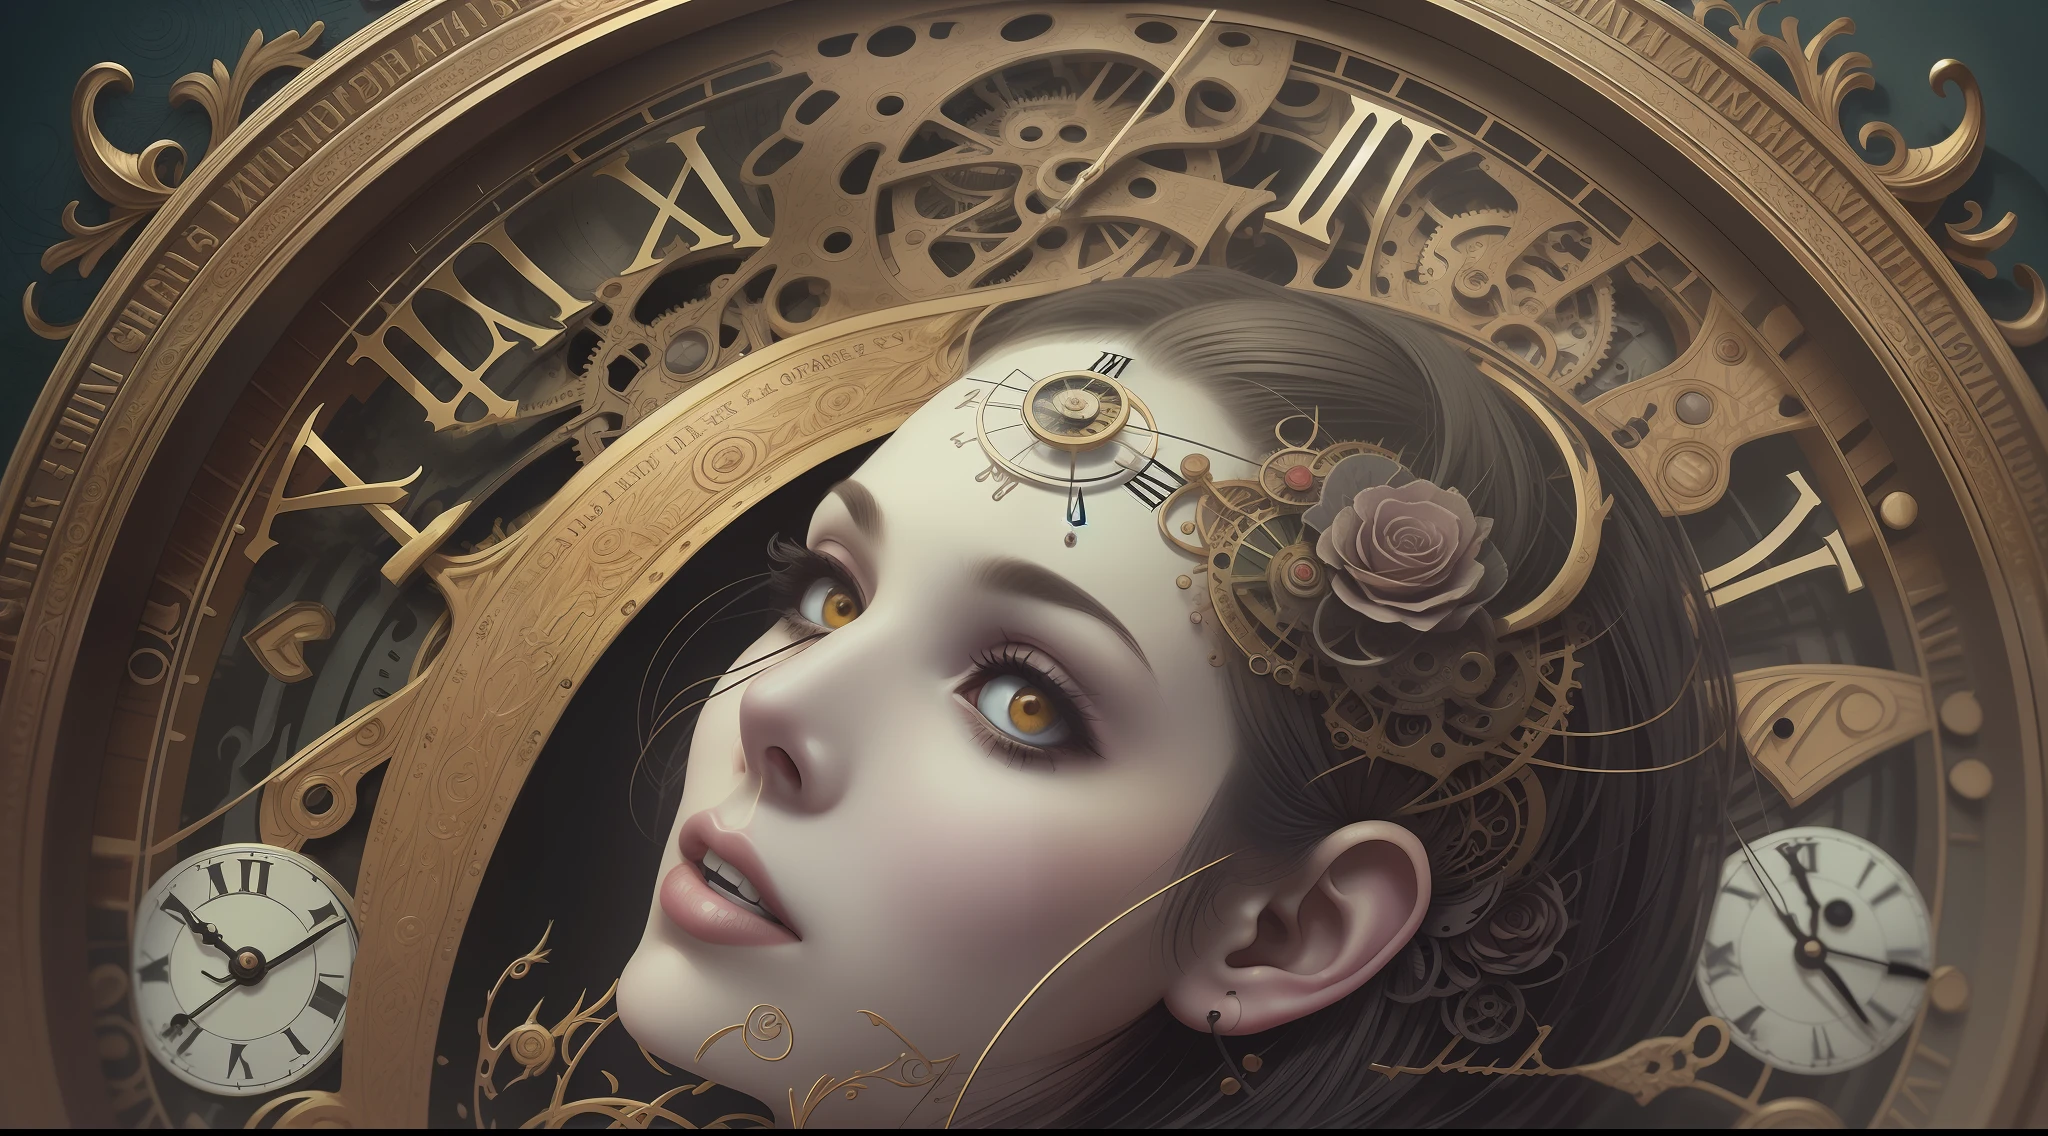 The anatomy of a beautiful zombie woman's head, Antique clock as one of woman's eyes, an ultra-fine detailed painting by James Jean, Traveling Octopath, behance contest winner, vanity, angular, altermoderno, surreal, realist, intrinsic.